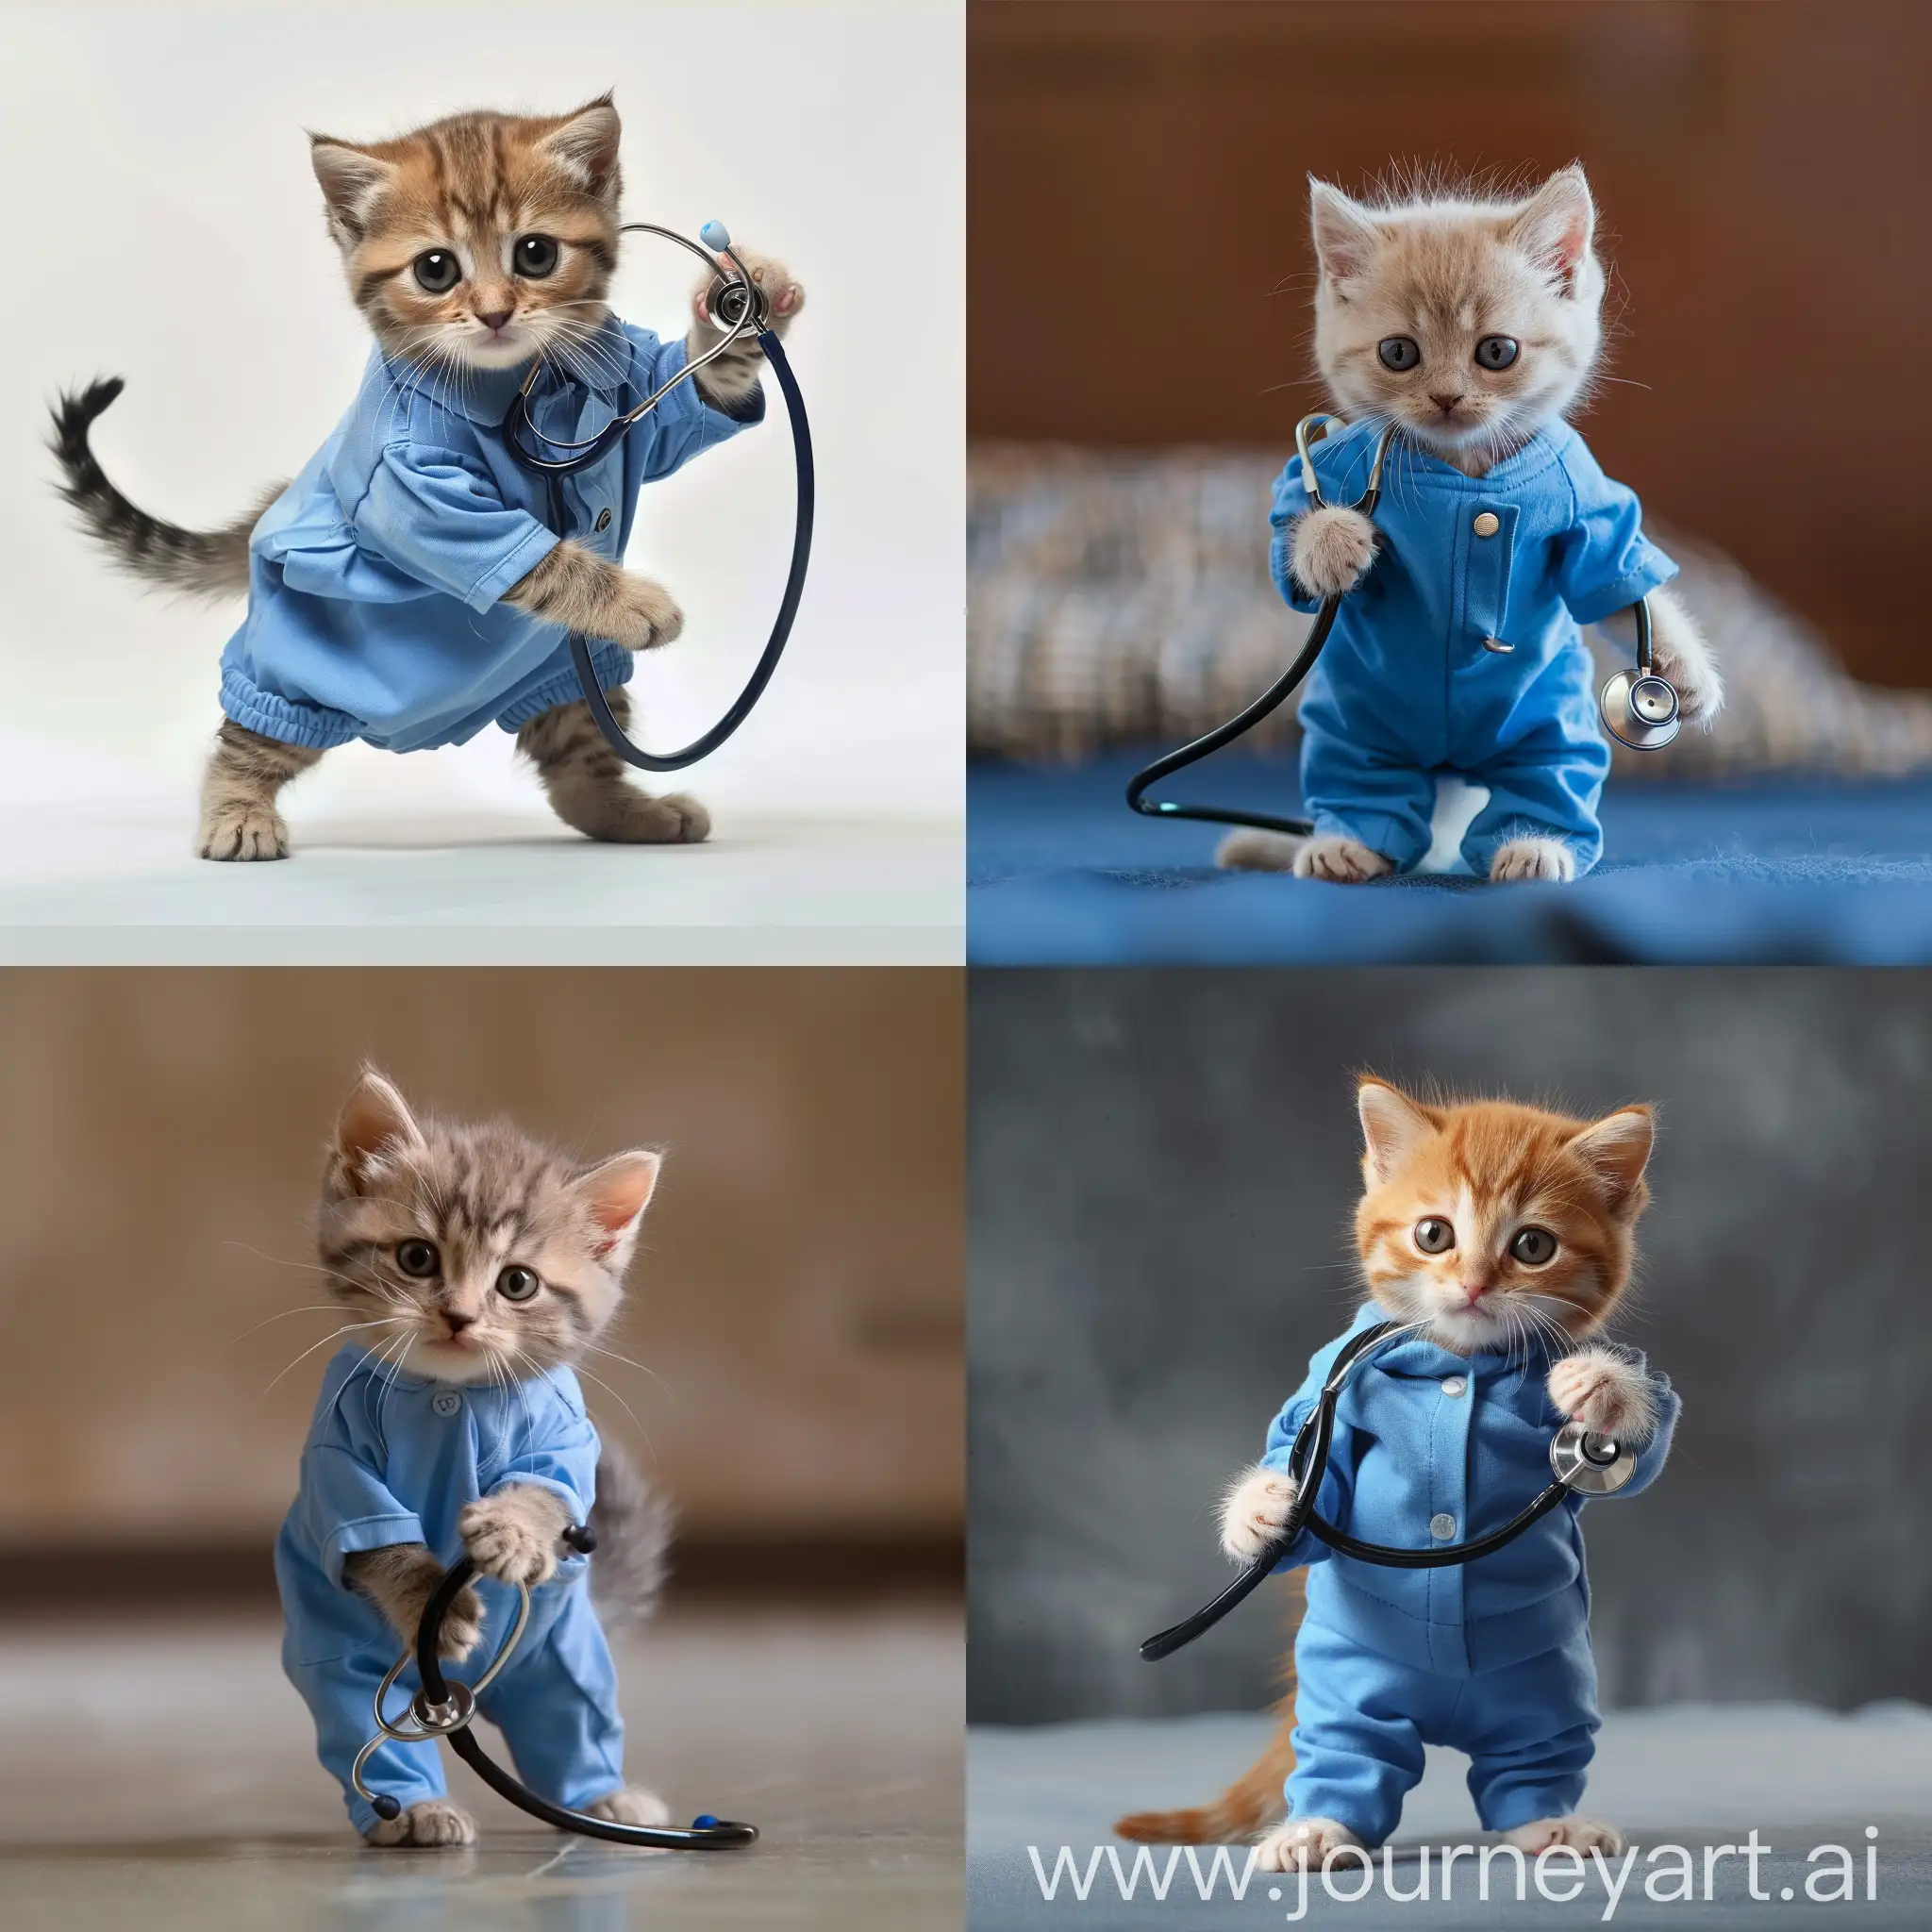 A kitten that is a doctor wearing blue scrubs and holding a stethoscope